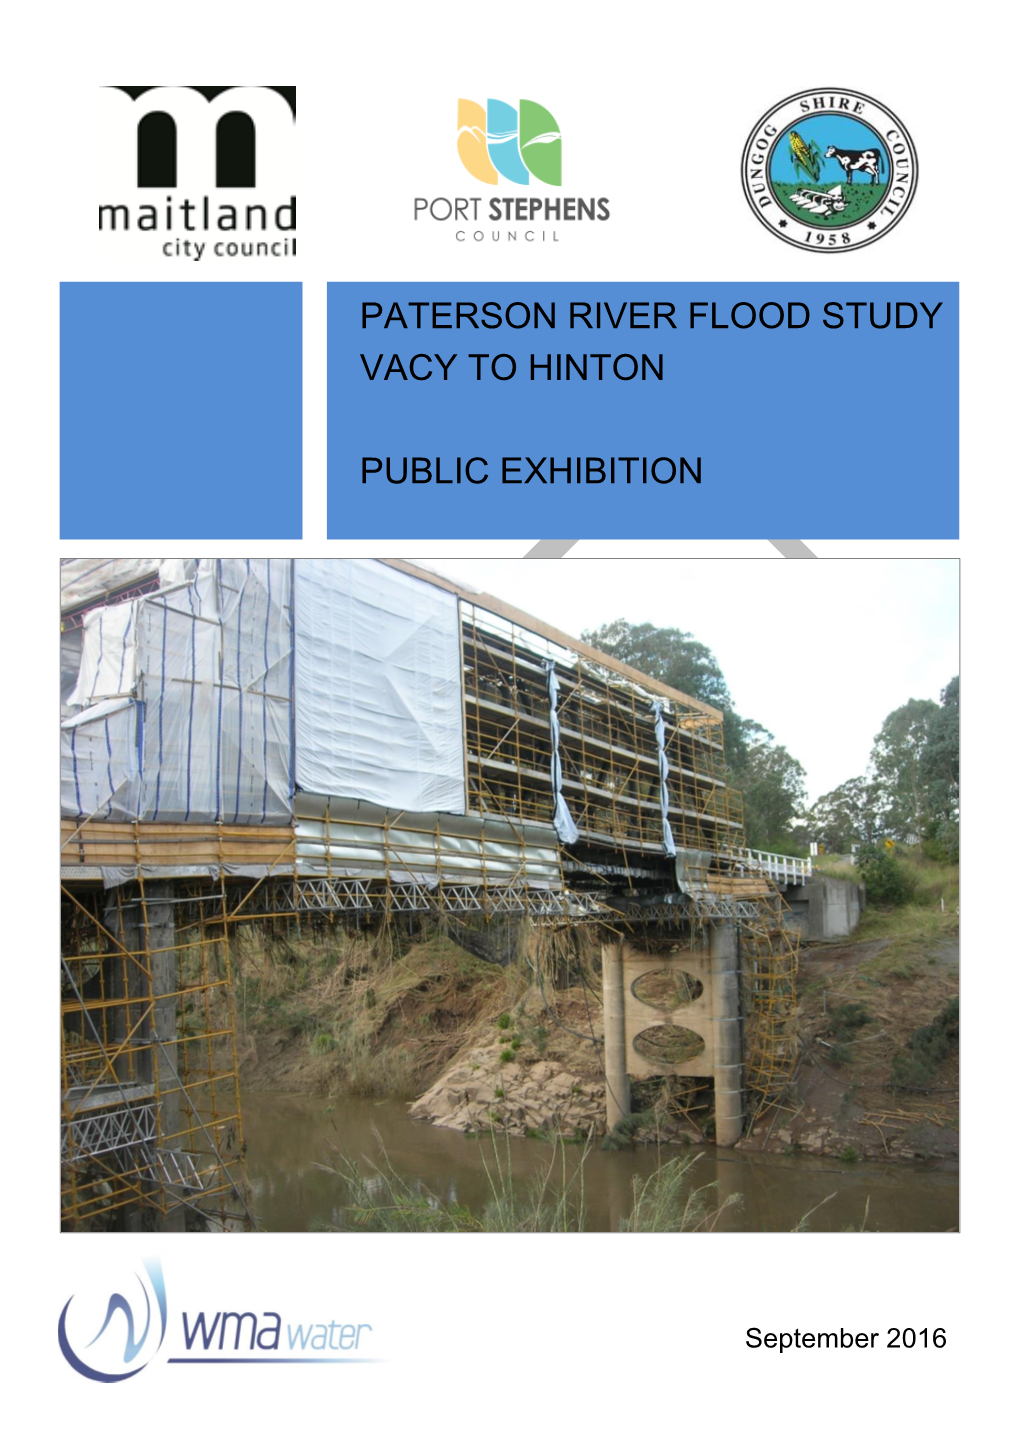 Paterson River Flood Study Vacy to Hinton